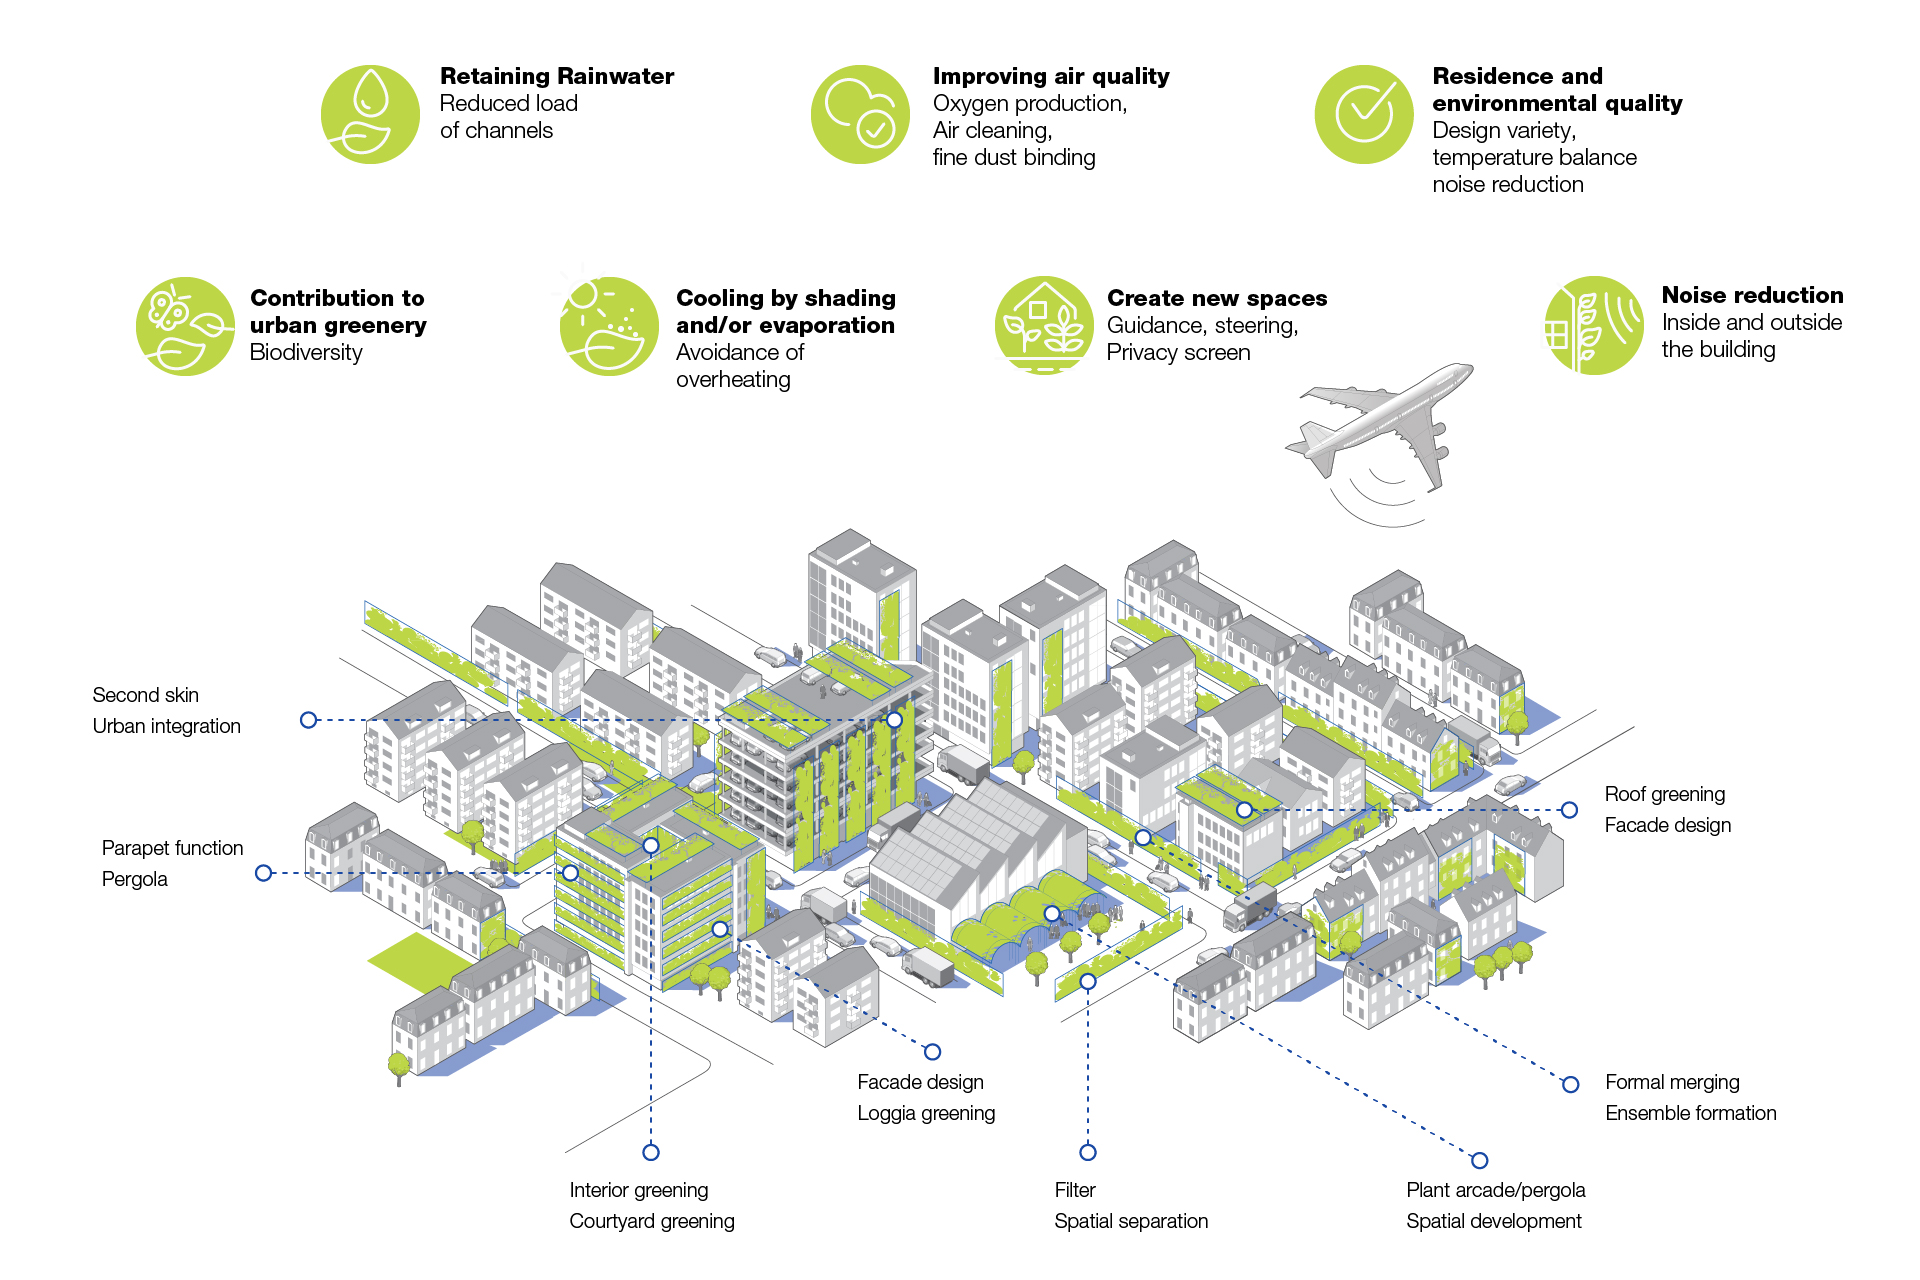 [Translate to Spain (ES), Spanish (Default):] Infographic with the benefits of greening in urban areas